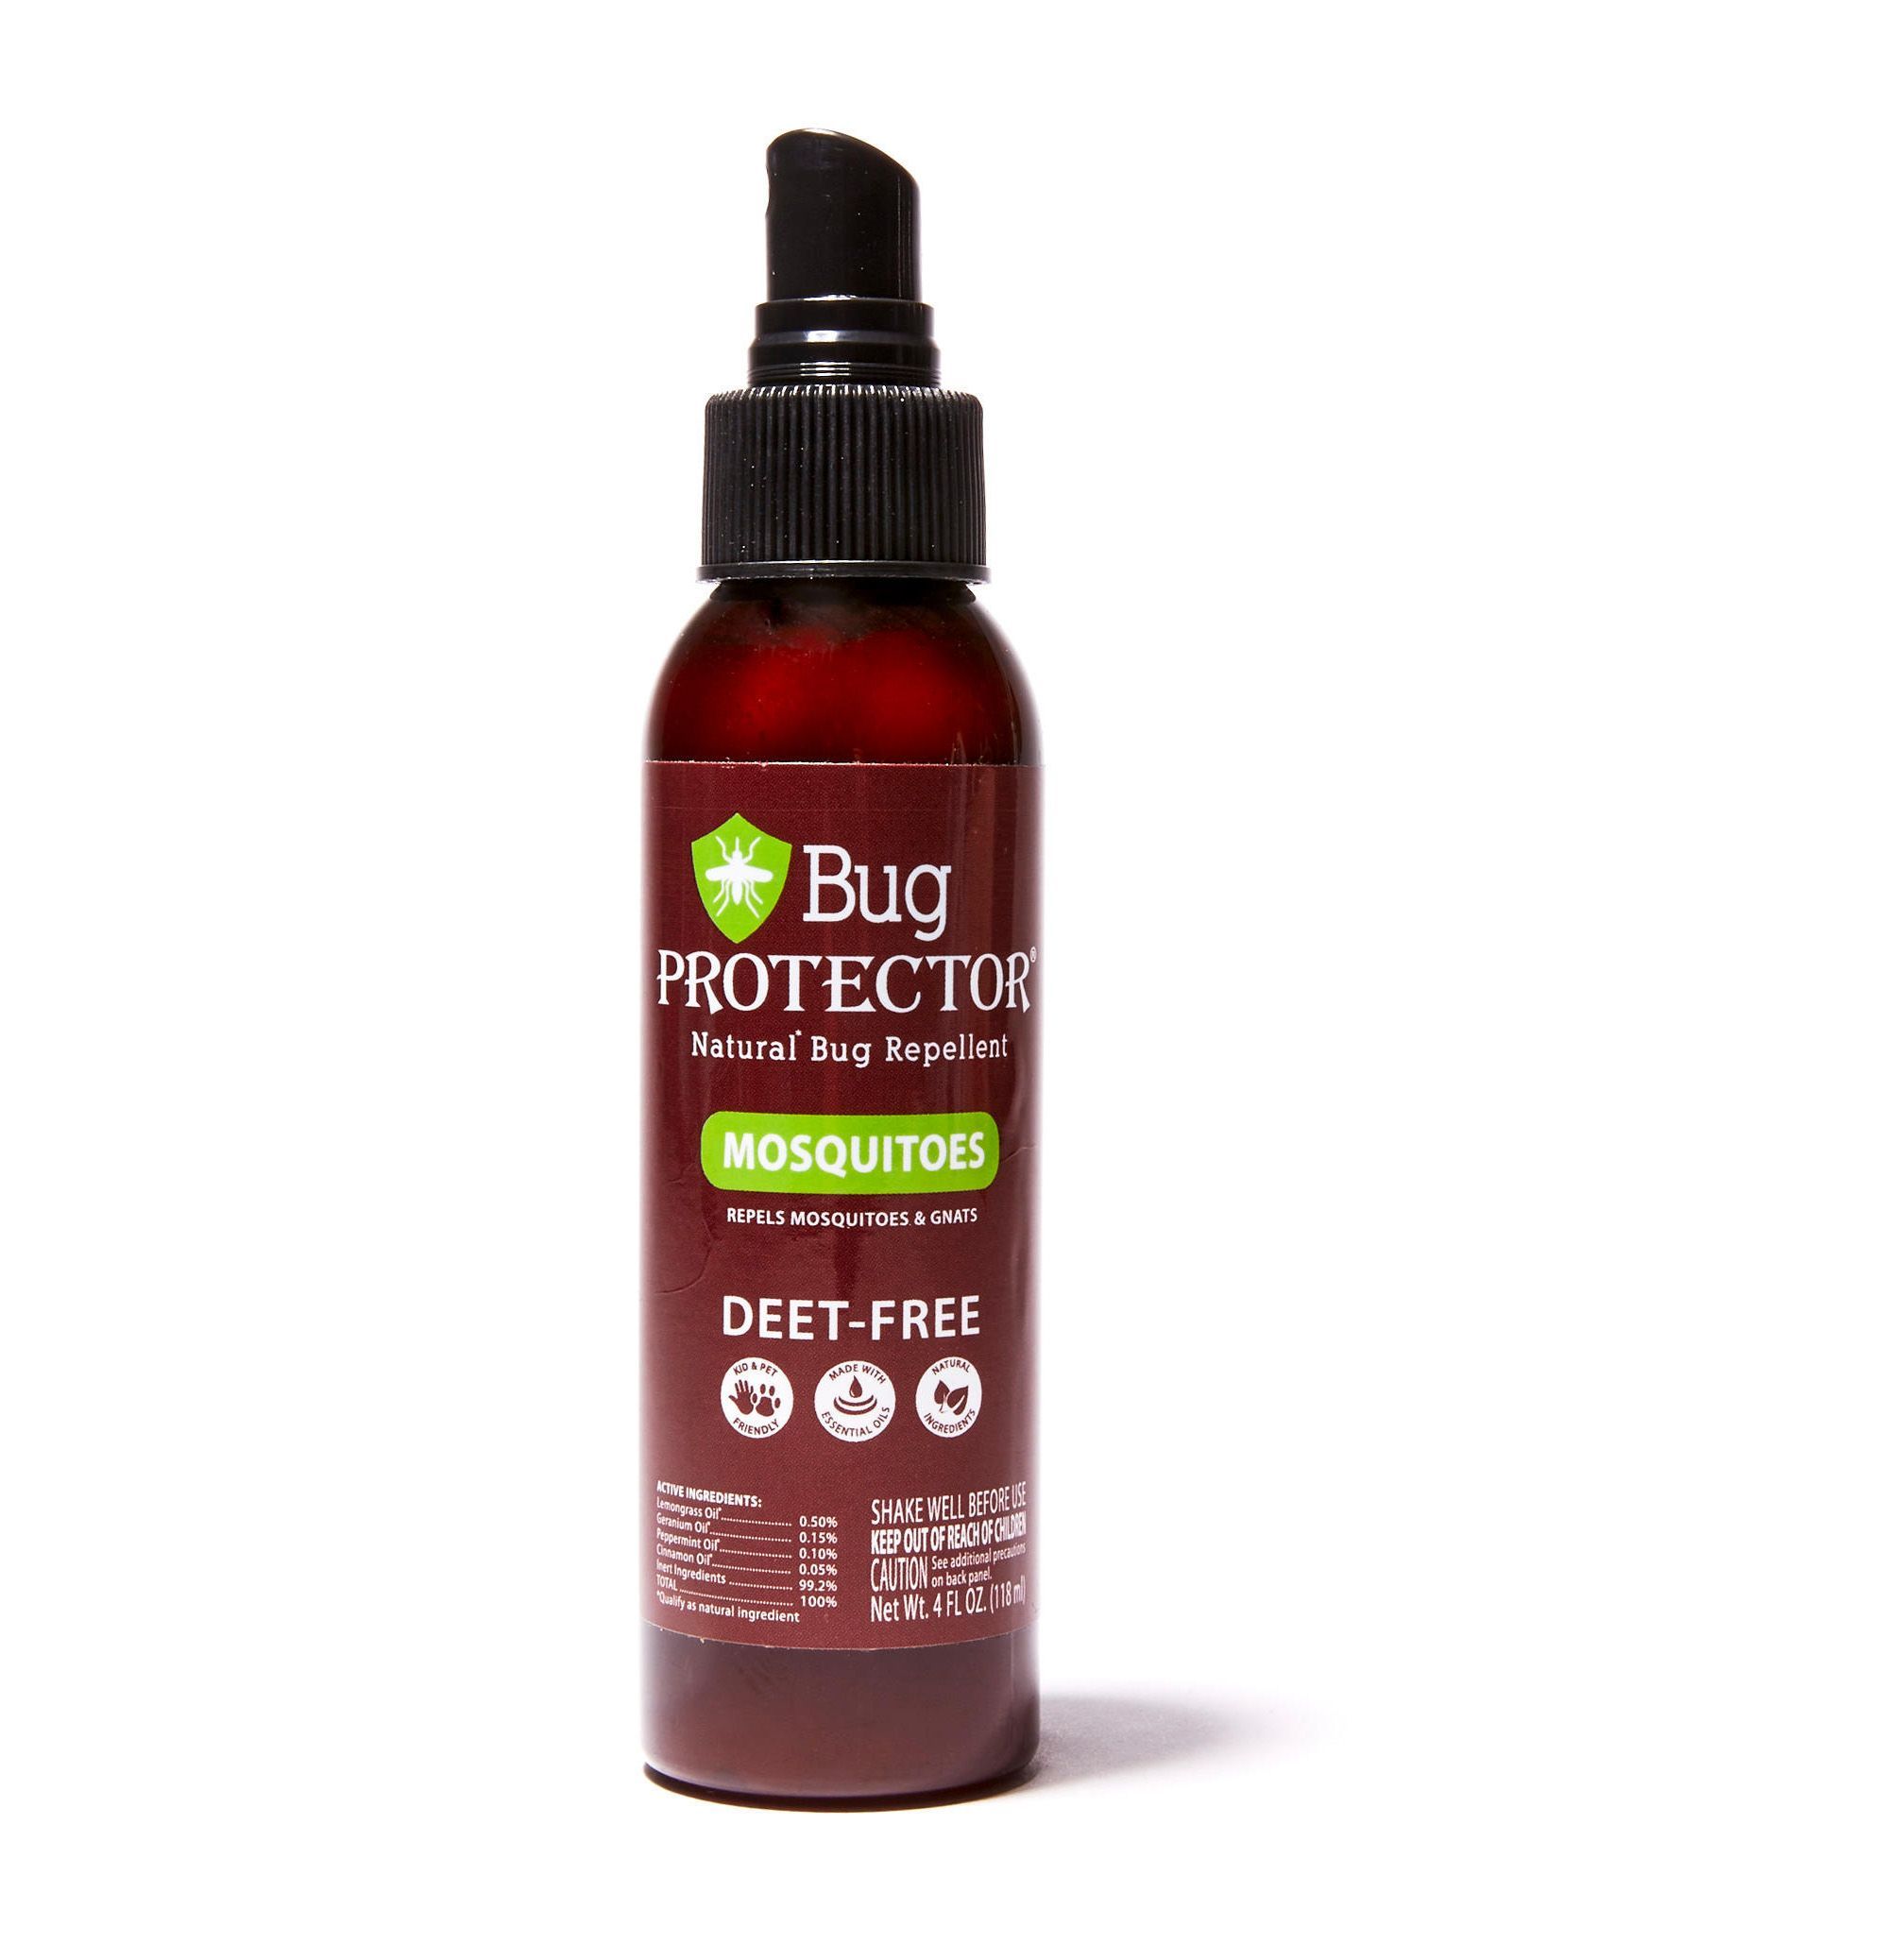 Bug Protector All Natural Mosquito/Insect Repellent Spray